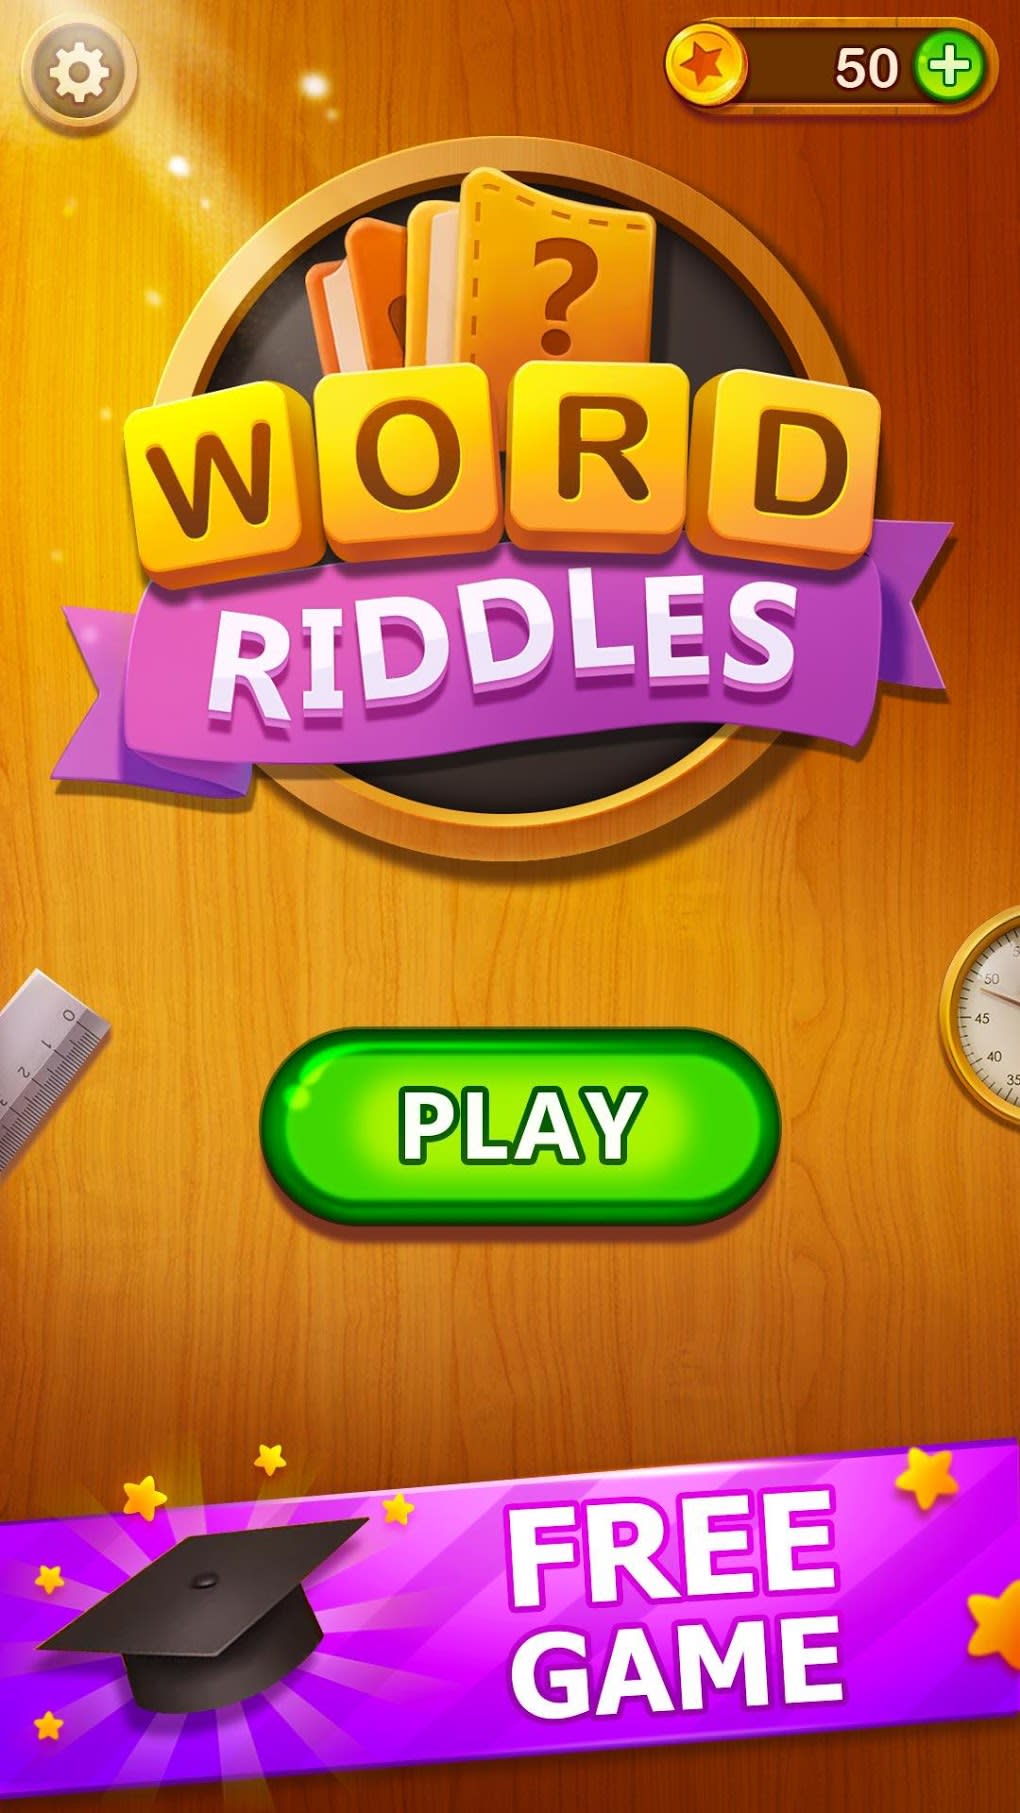 Download Word Cross Puzzle: Best Free Offline Word Games 4.6 for Android 